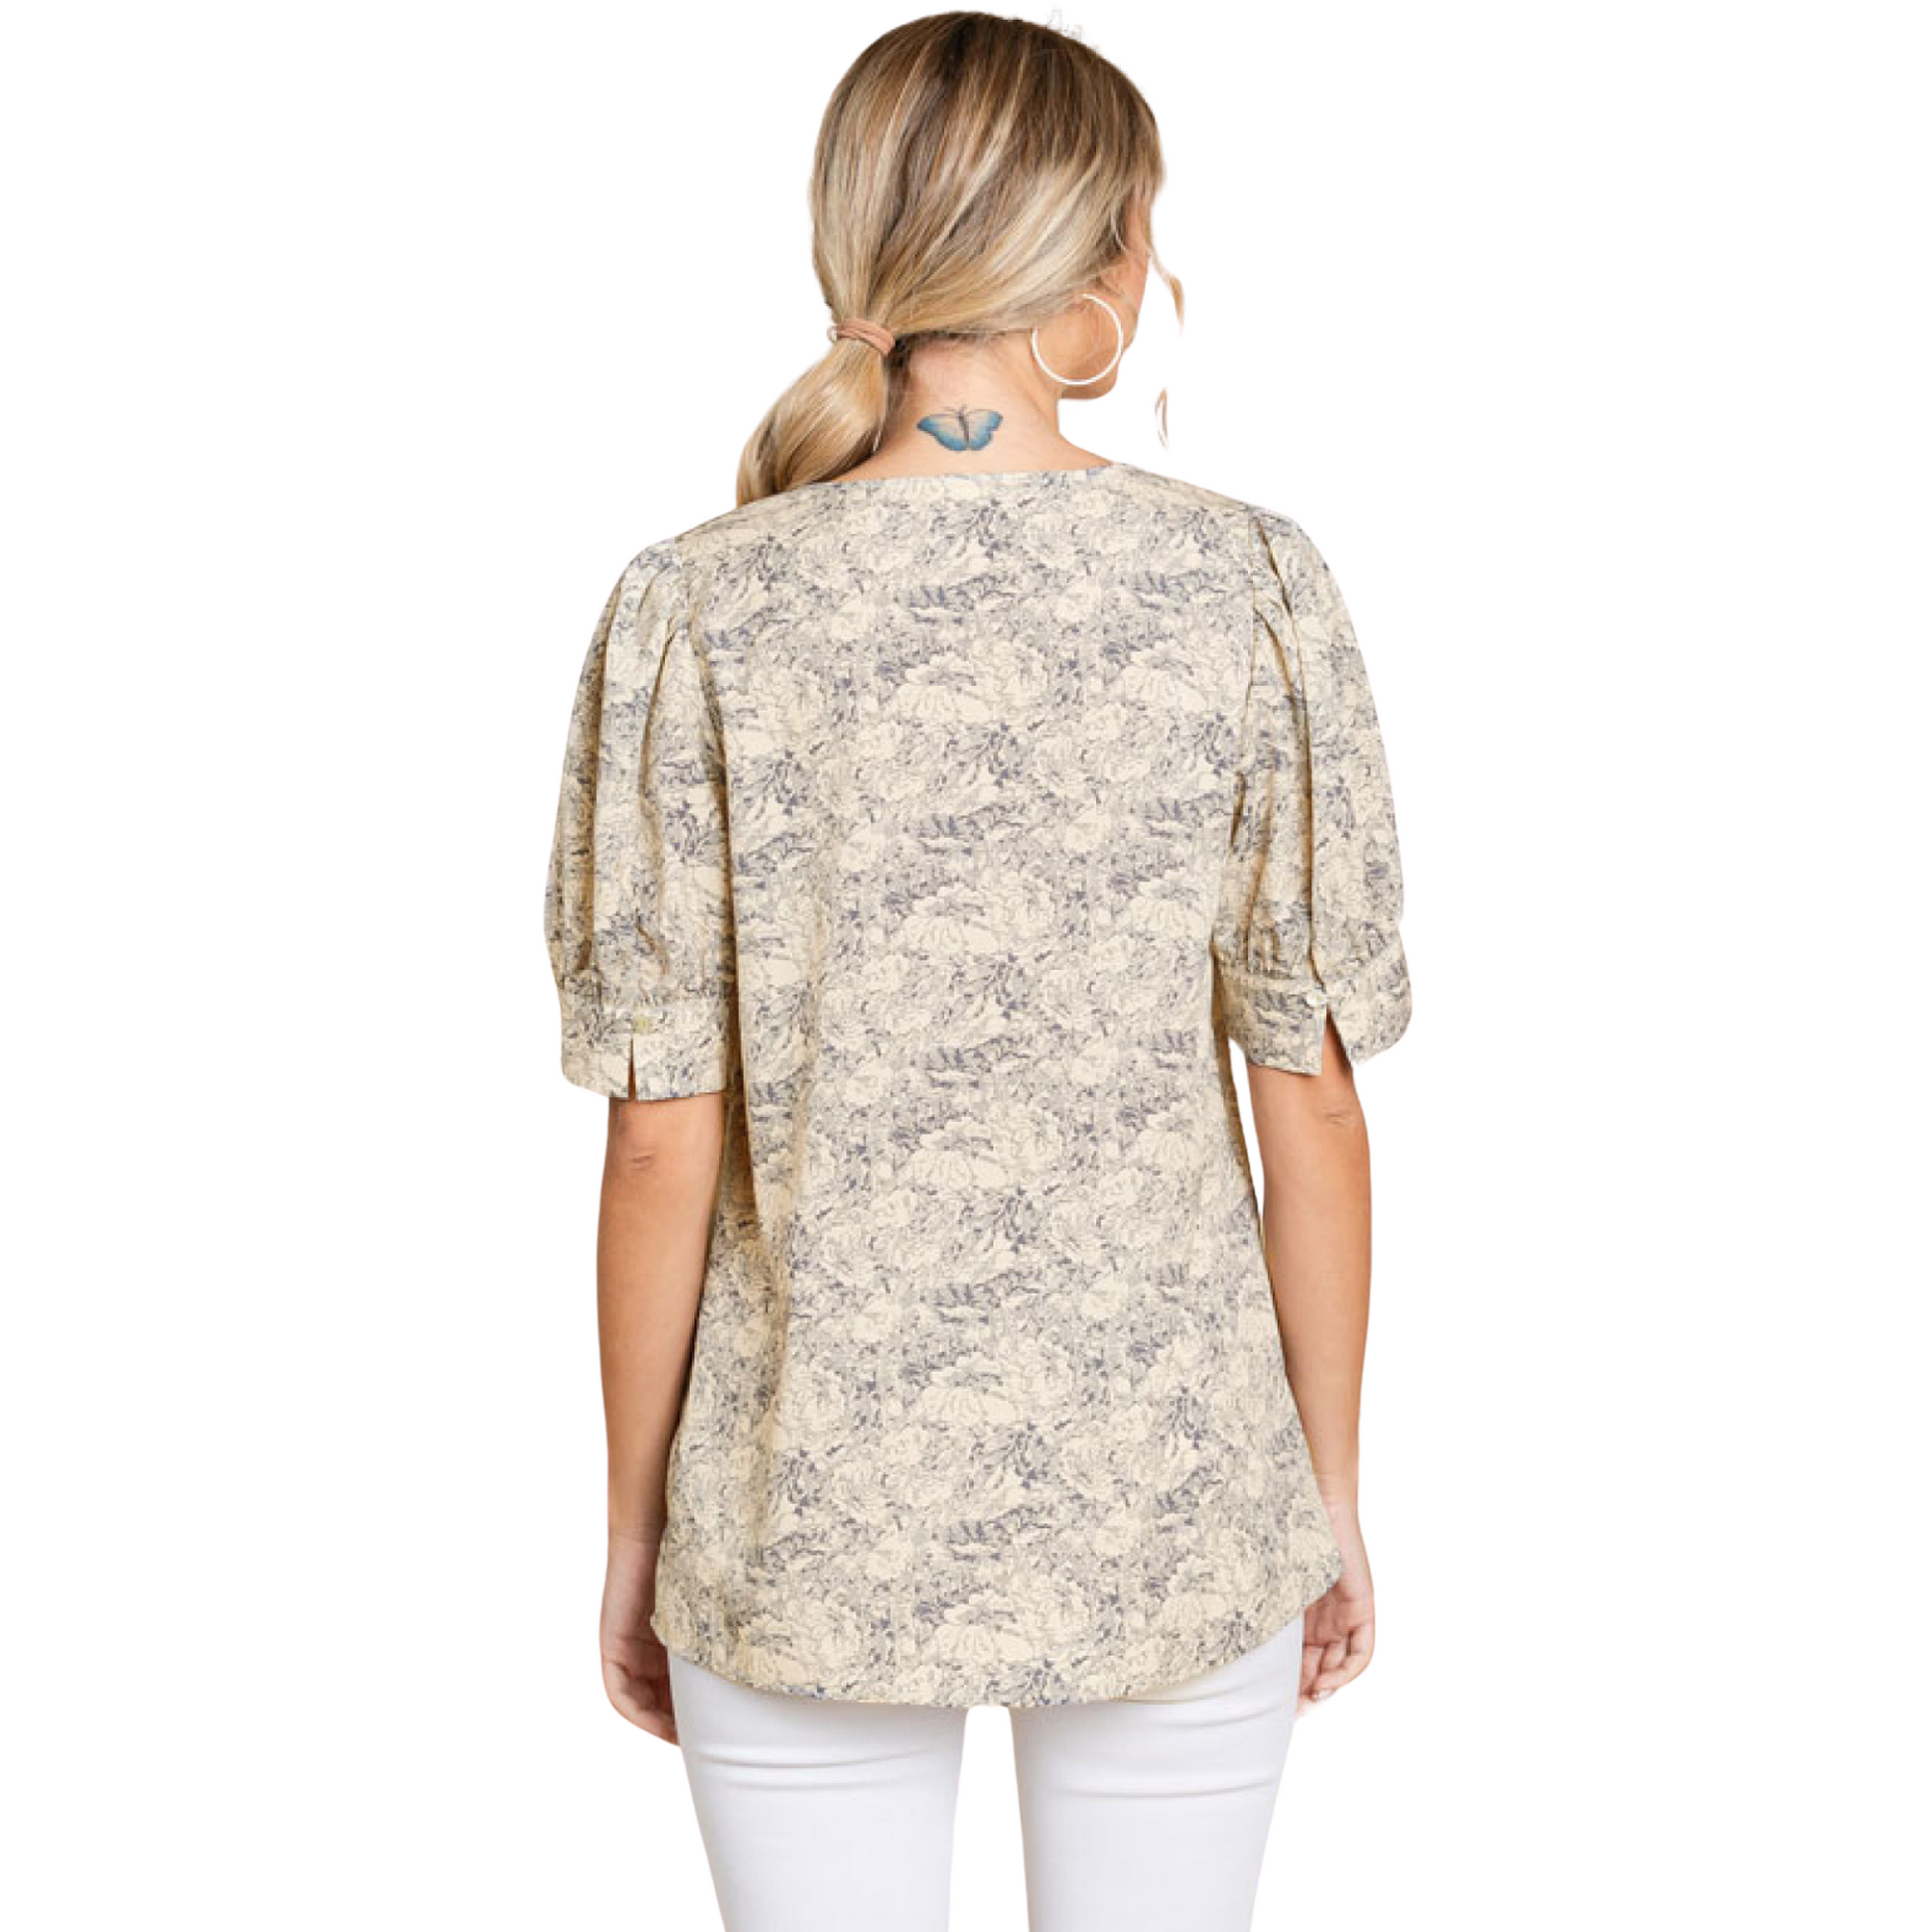 Introduce elegance into your wardrobe with our Jacquard pattern print top. Featuring a flattering V-neckline, short peasant sleeves, and buttoned cuffs, this unlined and non-sheer top is both lightweight and versatile. The natural color adds a touch of sophistication to any outfit.